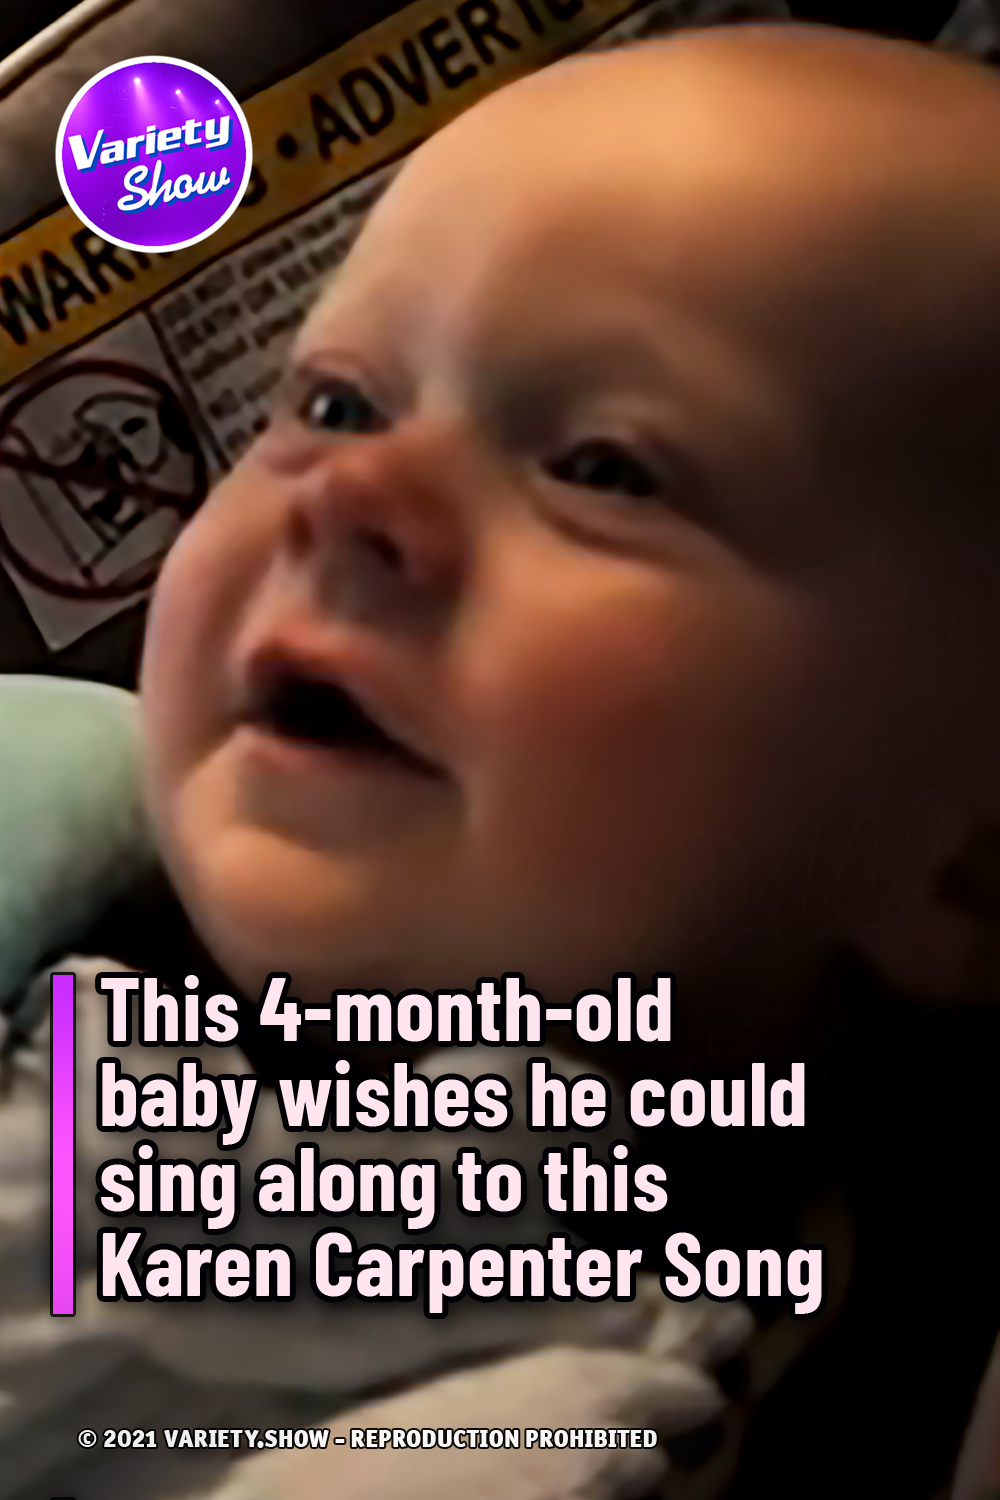 This 4-month-old baby wishes he could sing along to this Karen Carpenter Song